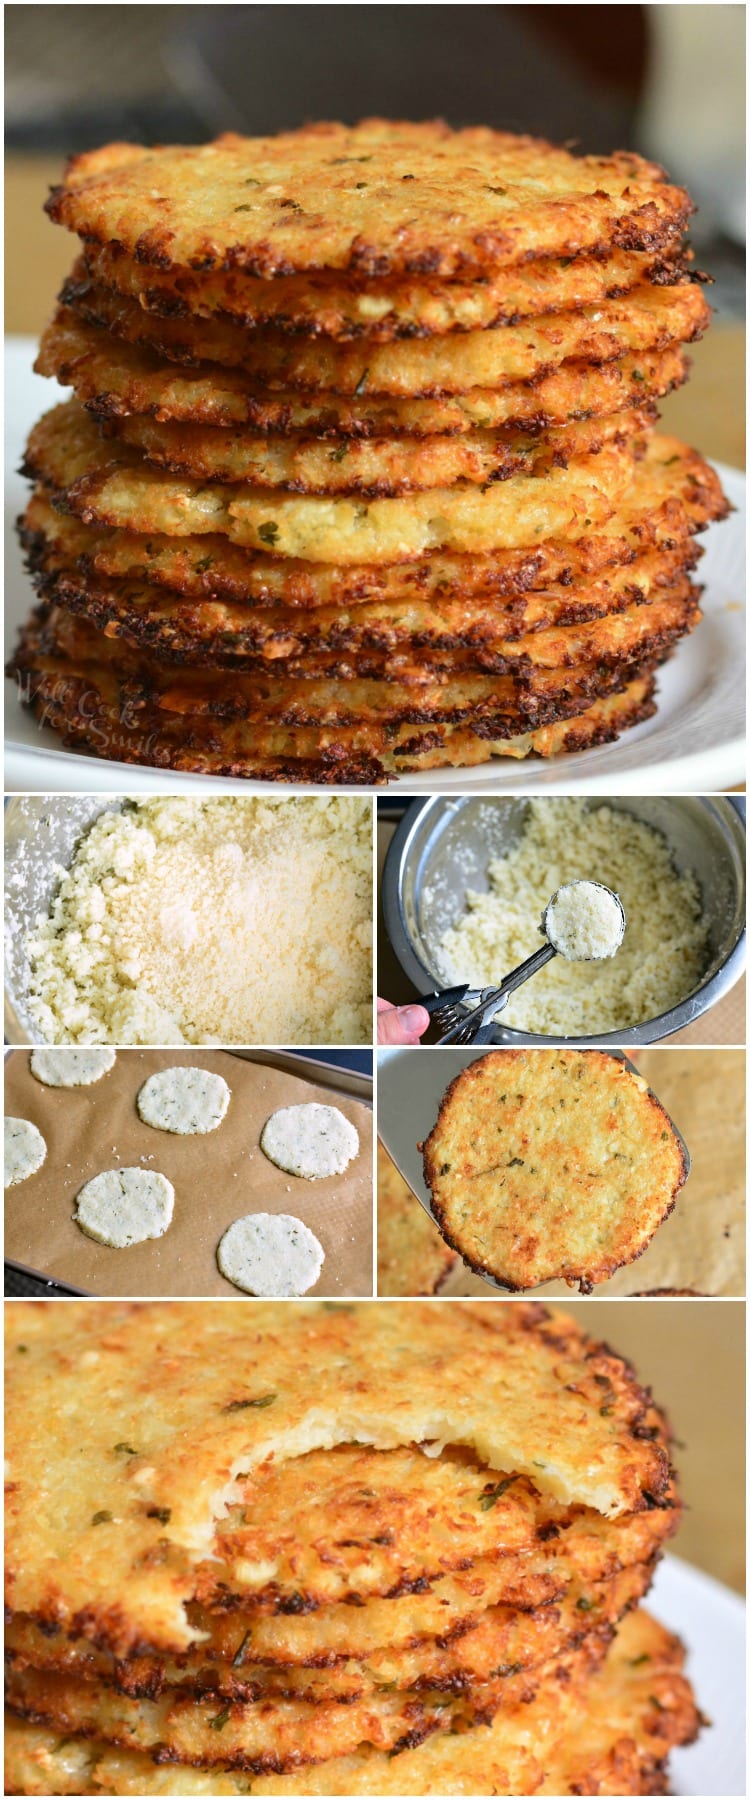 Cauliflower Parmesan Crisps. Amazing cauliflower snack that kids and adult will love. All you need is a head of cauliflower, block of Parmesan cheese, dry parsley flakes, and some garlic powder. #snack #cauliflower #parmesan 